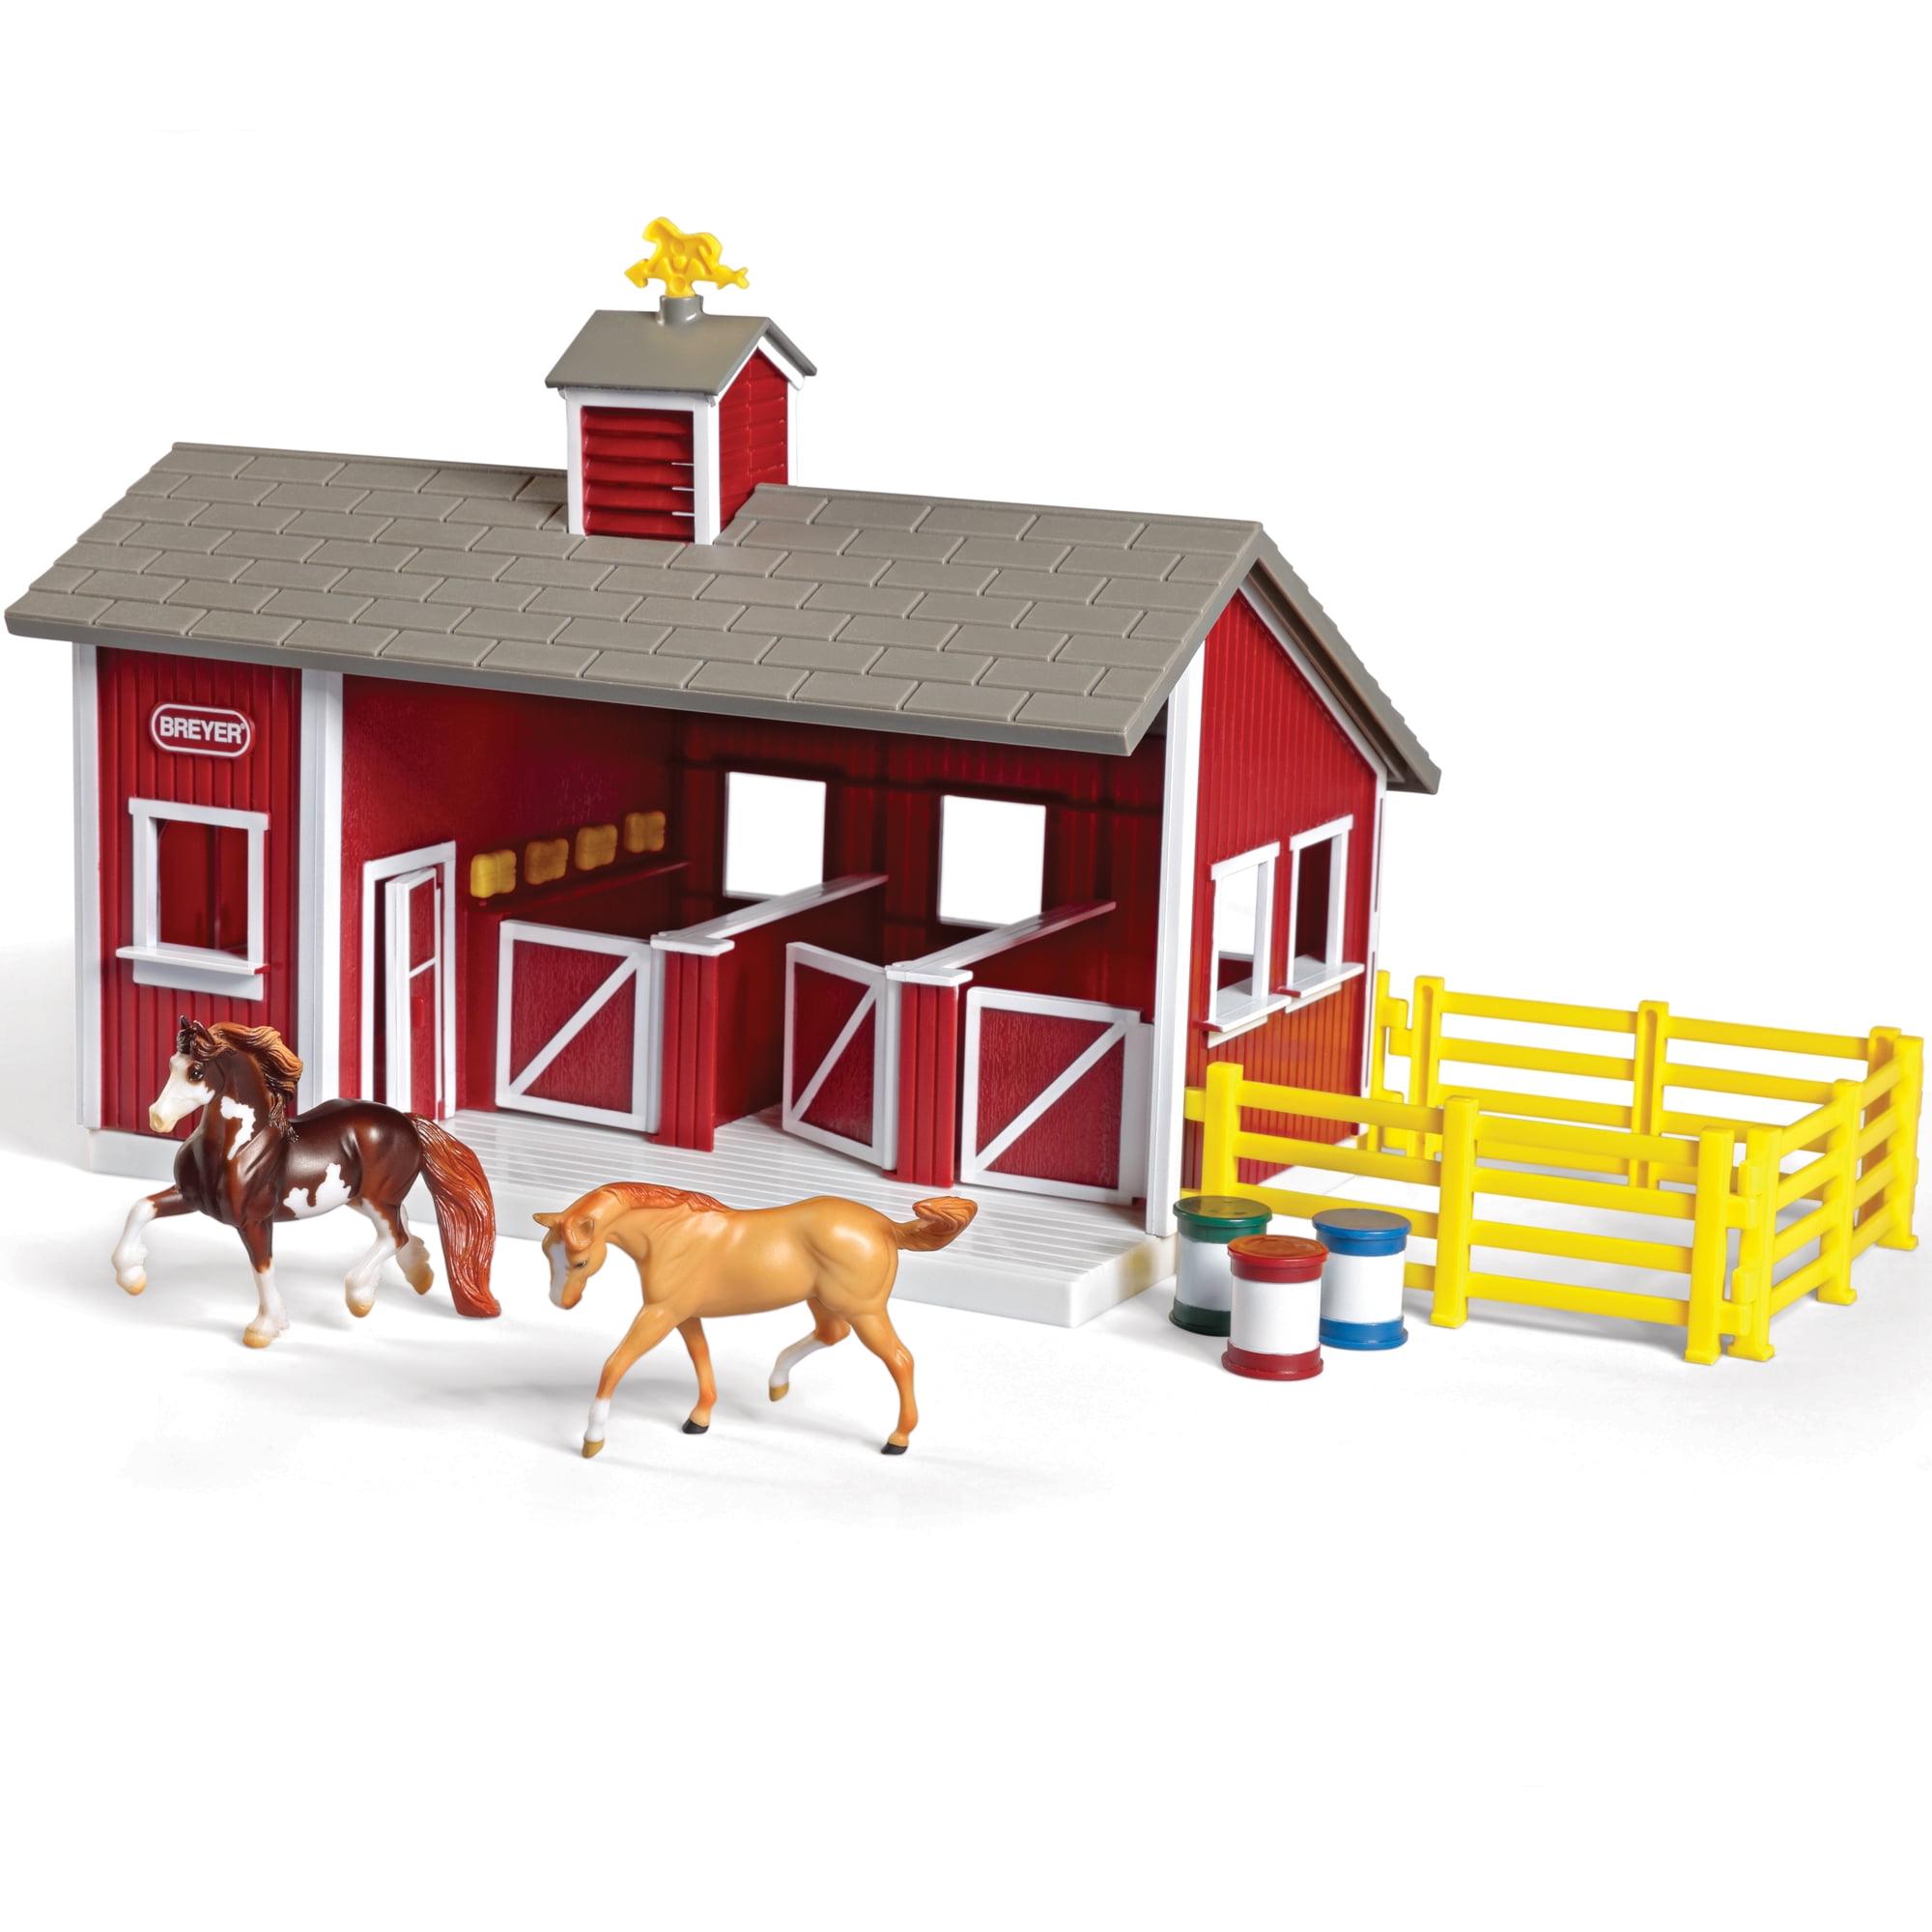 Breyer Play and Go Wooden Stable with 6 Stablemates Horses 